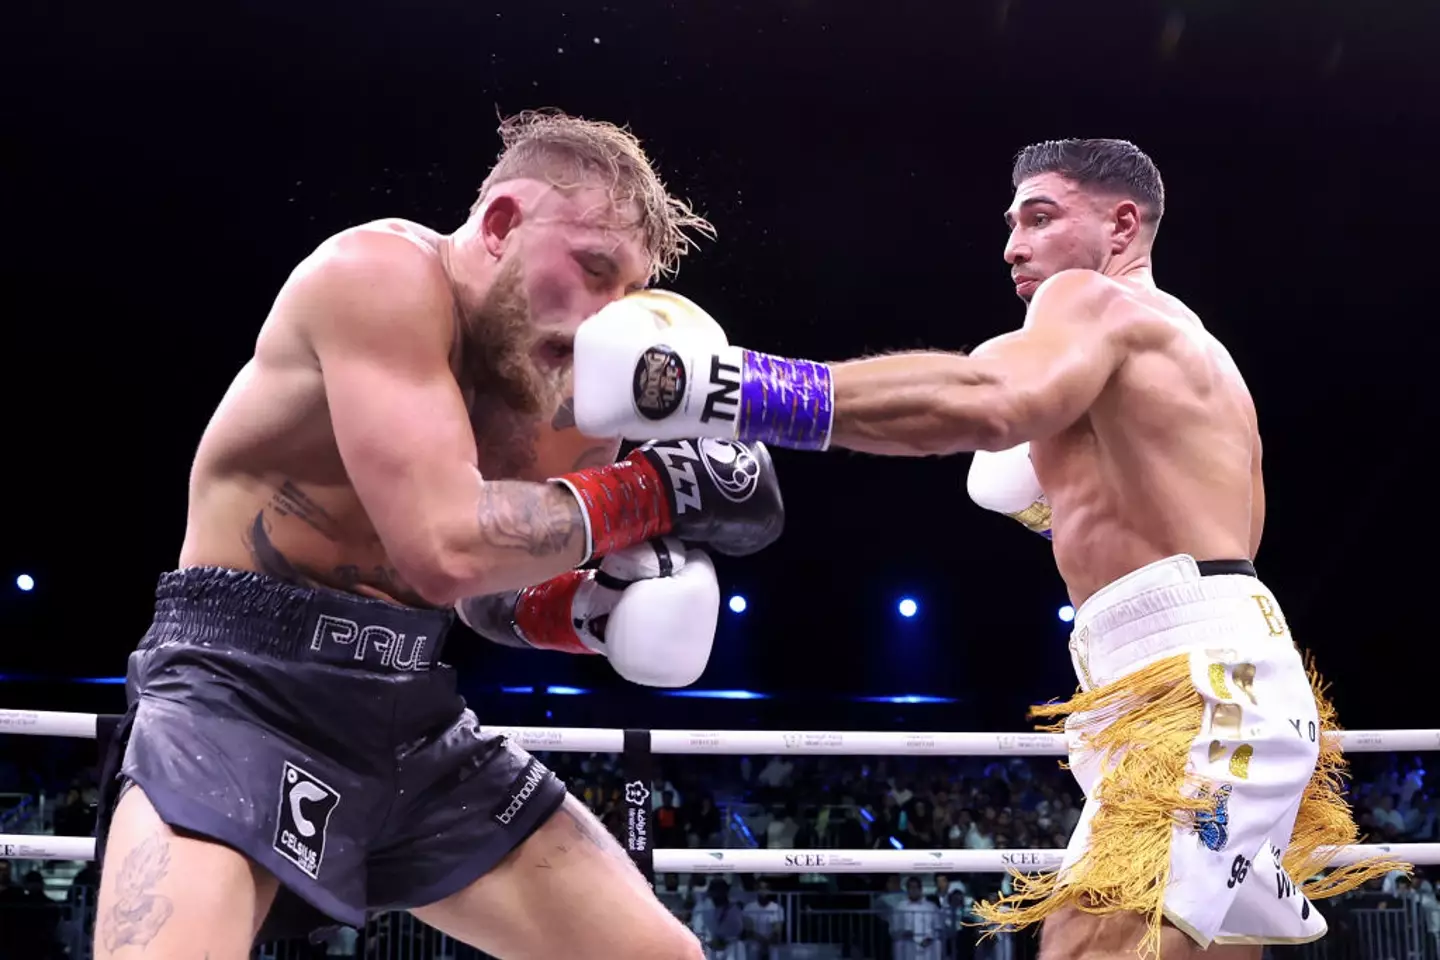 Jake Paul lost for the first time in his boxing career to Tommy Fury earlier this year.